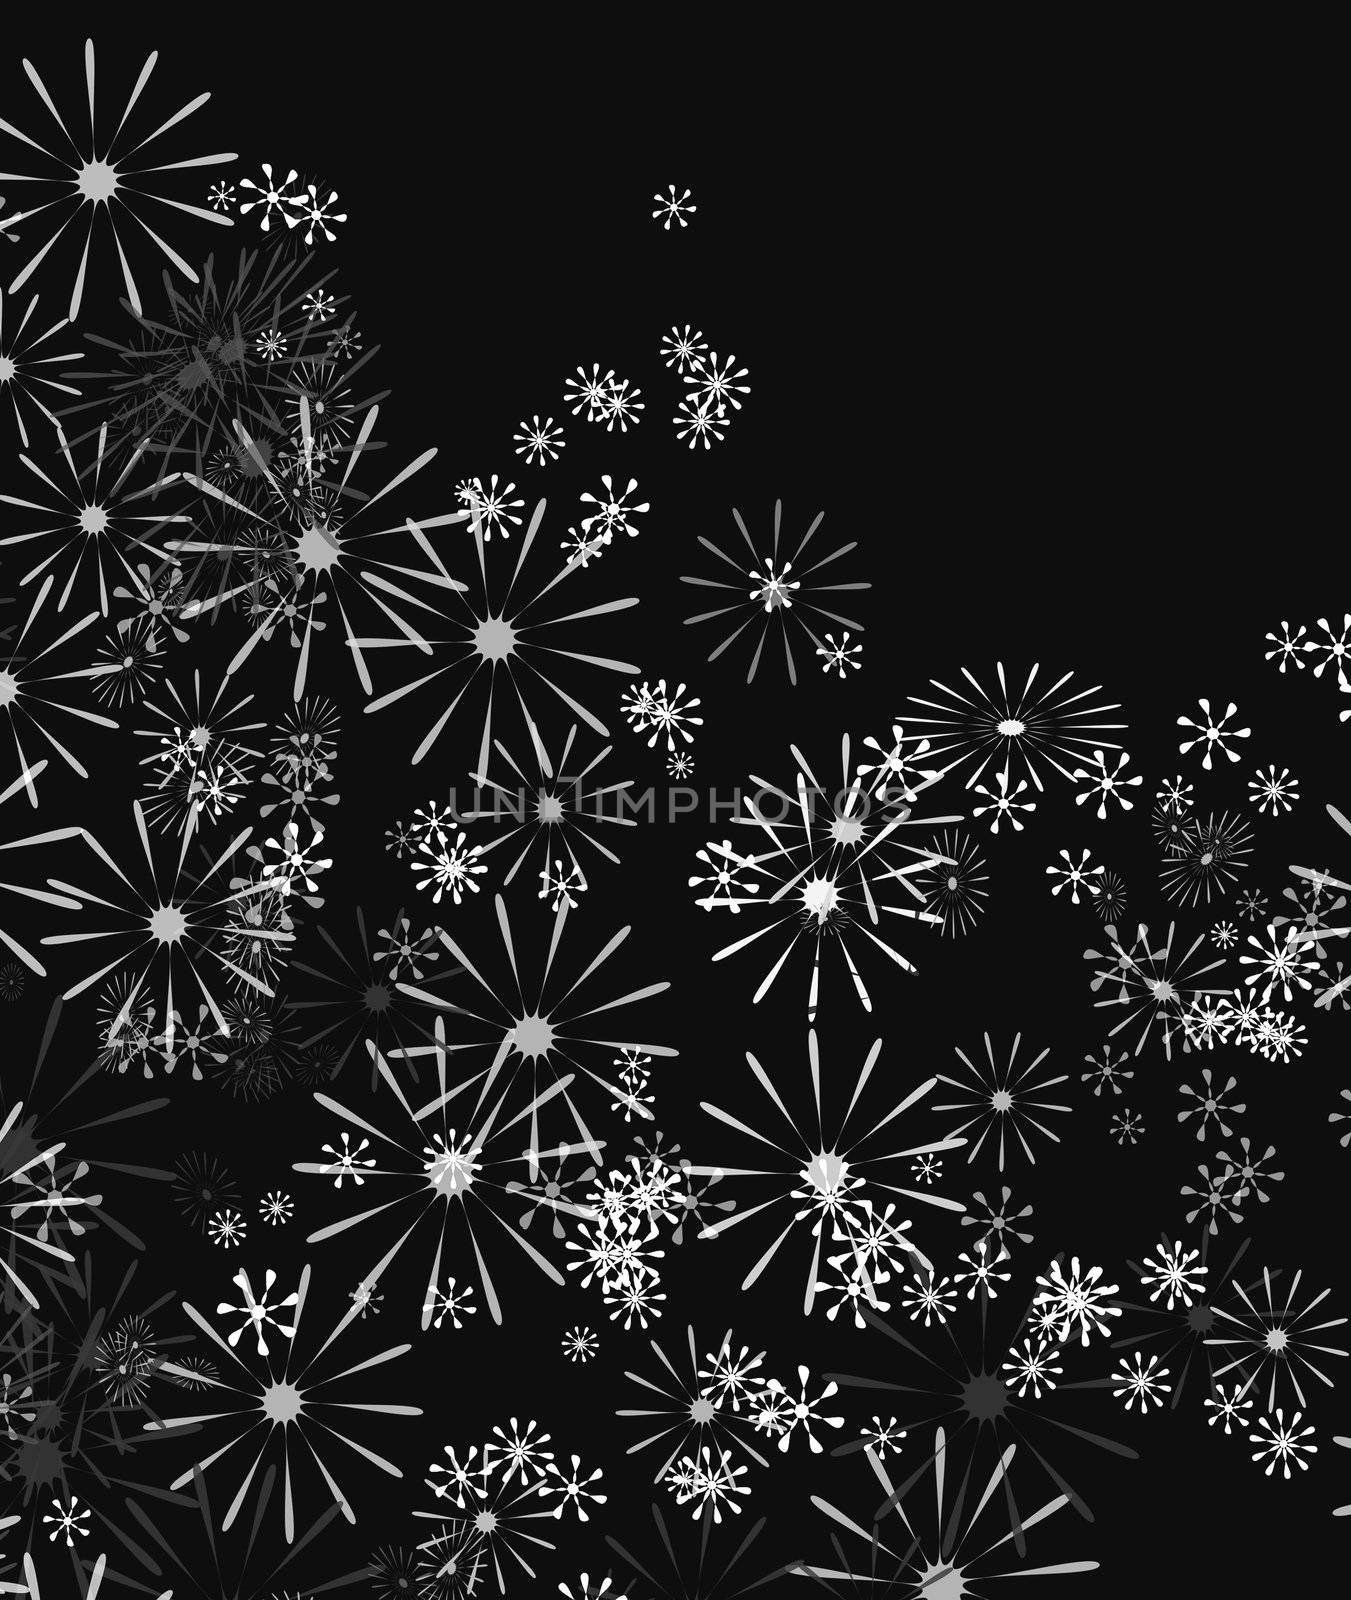 Abstract illustration depicting many pale flowers against black background.